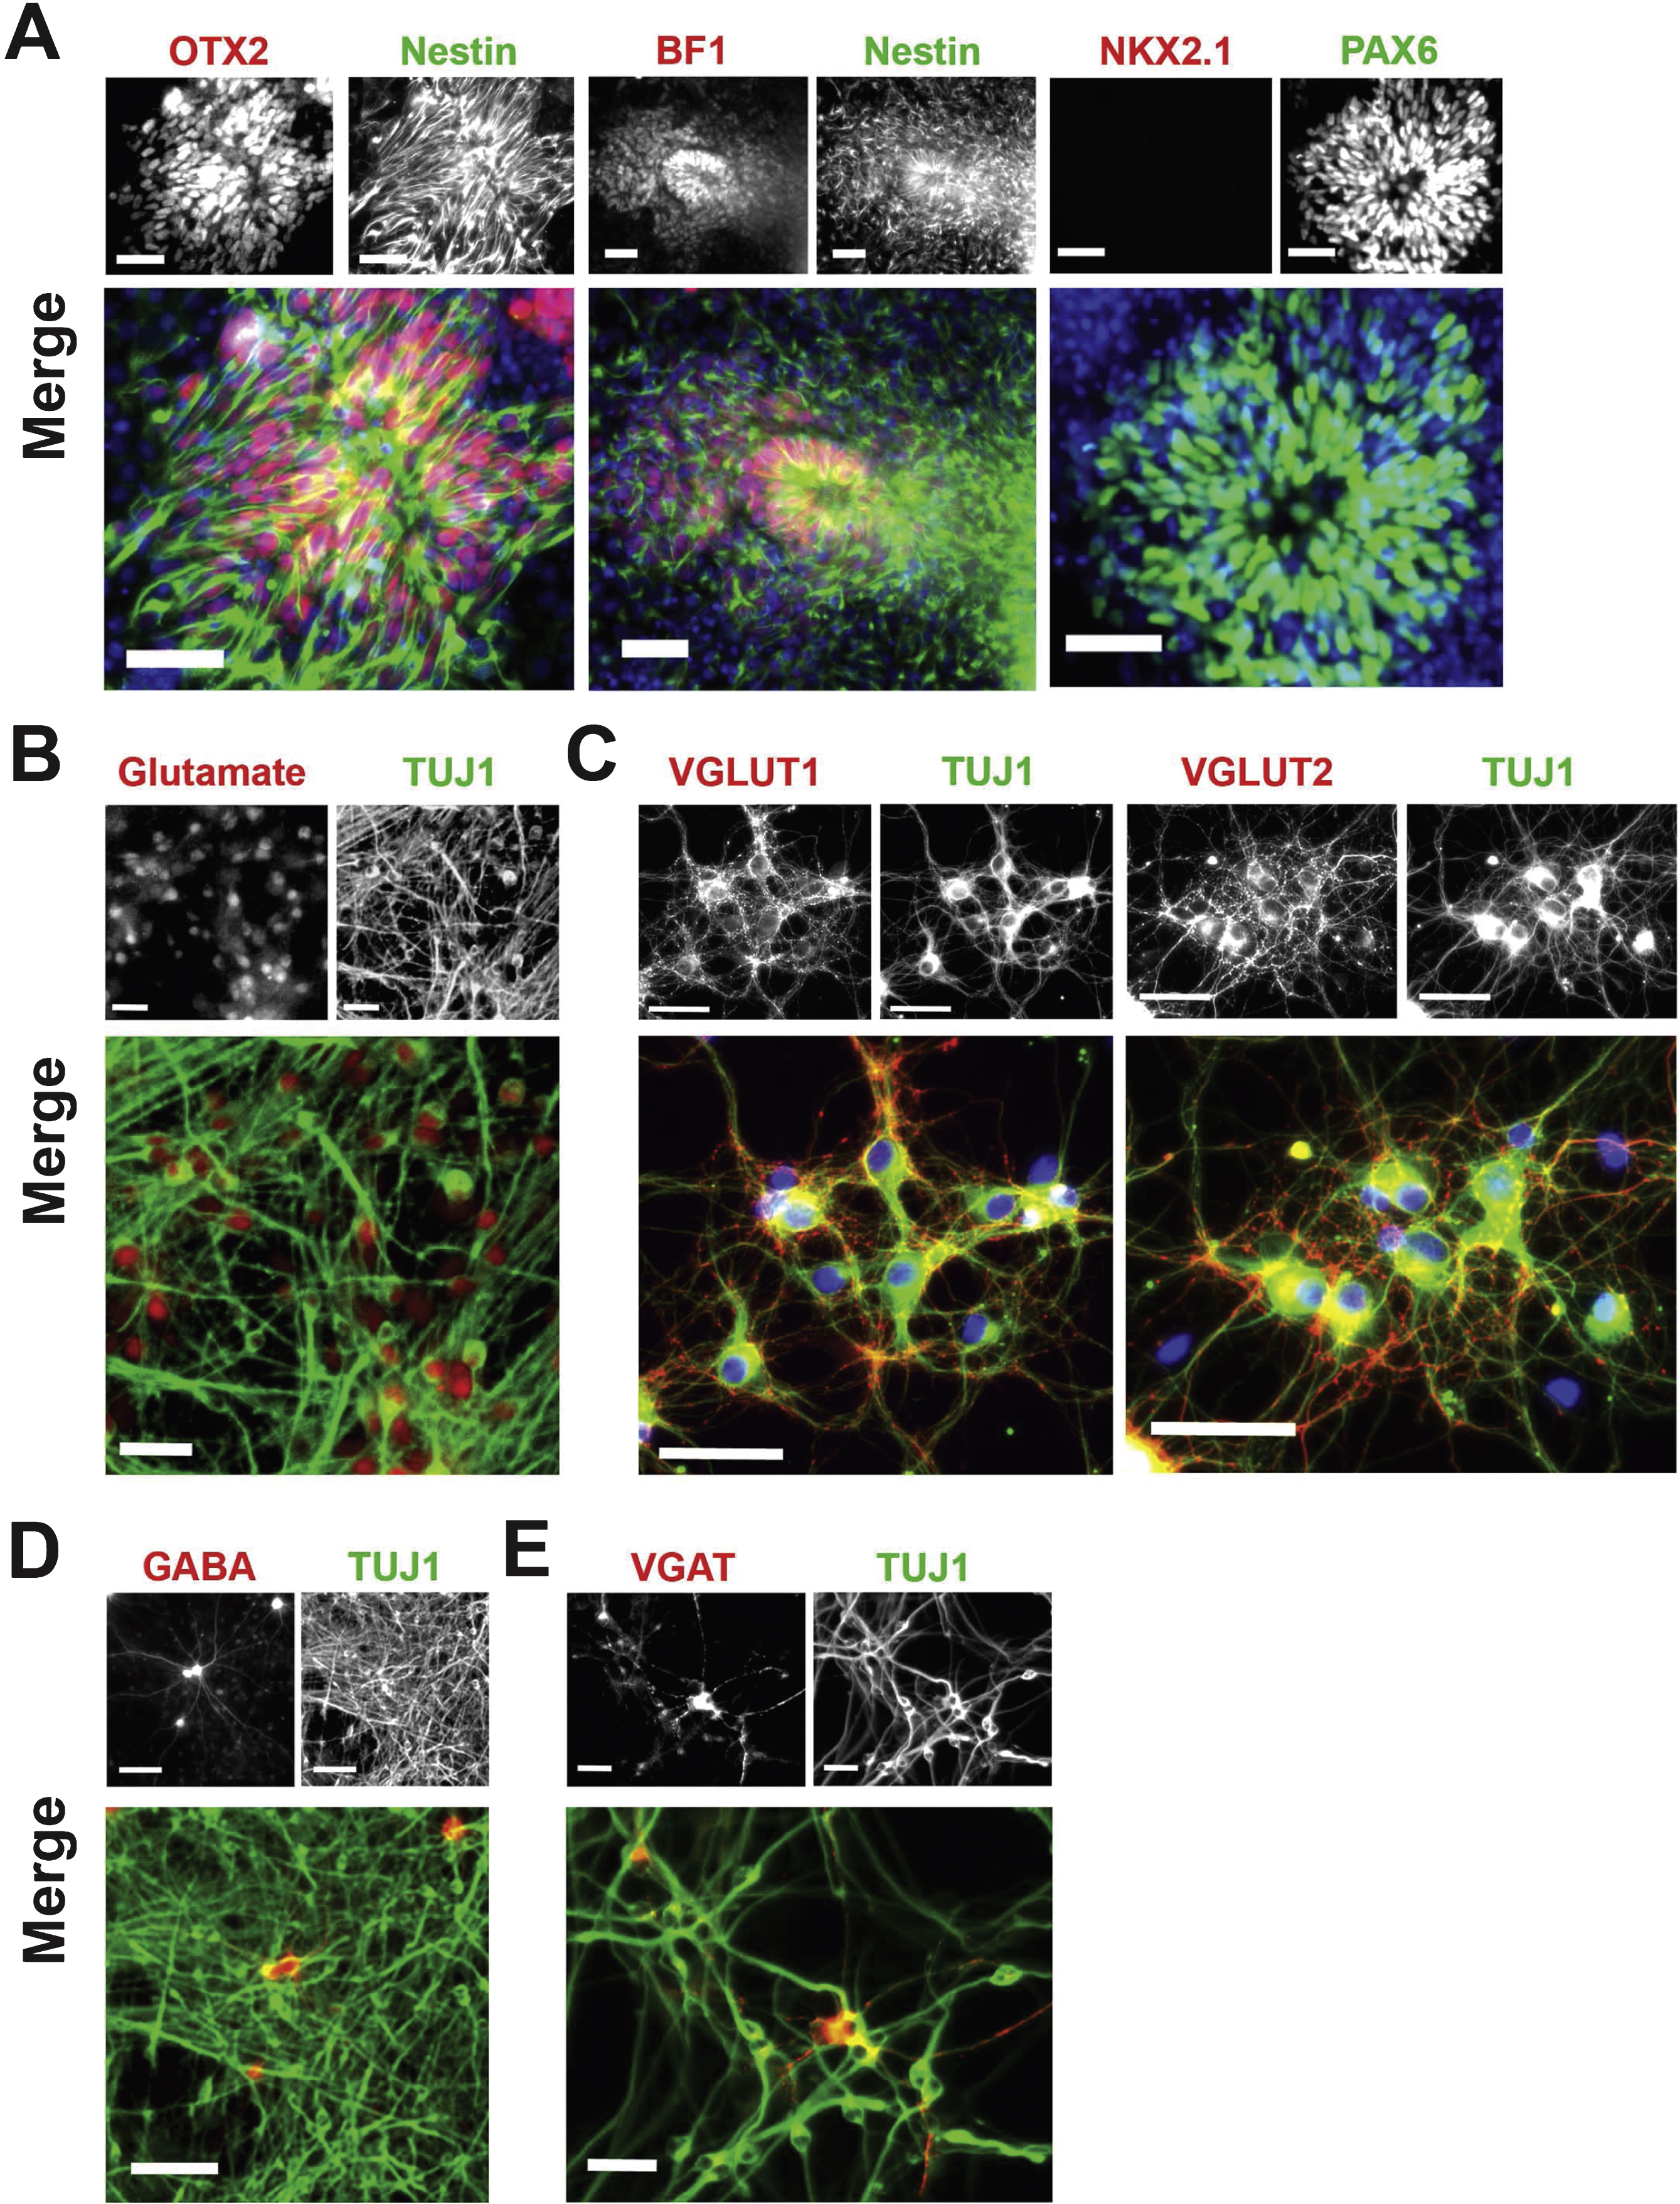 Neocortical differentiation. (A) Characterization of neocortical neuroepithelial rosettes derived from hPSCs on day 16 of differentiation. Nestin + rosettes (green) contain cells expressing the anterior telencephalic transcription factors OTX2 (red, left frame), BF1 (red, middle frame), and PAX6 (green, right frame). In contrast, the ventral telencephalic marker NKK2.1 (red, right frame) was not expressed. Nuclei are stained with DAPI (blue). Scale bar = 50μm. (B) Immunocytochemical staining for glutamate (red) and TUJ1 (green) on day 47 of differentiation using the current protocol, as shown in Fig. 1B. Scale bar = 25μm. (C) TUJ1 + neurons (green) were positive for the vesicular glutamate transporters VGLUT1 (red, left frame) and VGLUT2 (red, right frame) on day 47 of differentiation. Nuclei are stained with DAPI (blue). Scale bar = 50μm. (D) Expression of GABA (red) and TUJ1 (green) by immunocytochemistry on day 47 of differentiation. Scale bar = 100μm. (E) Expression of the GABA transporter VGAT (red) and TUJ1 (green) by immunocytochemistry on day 47 of differentiation. Scale bar = 25μm. Cell line: ES04.